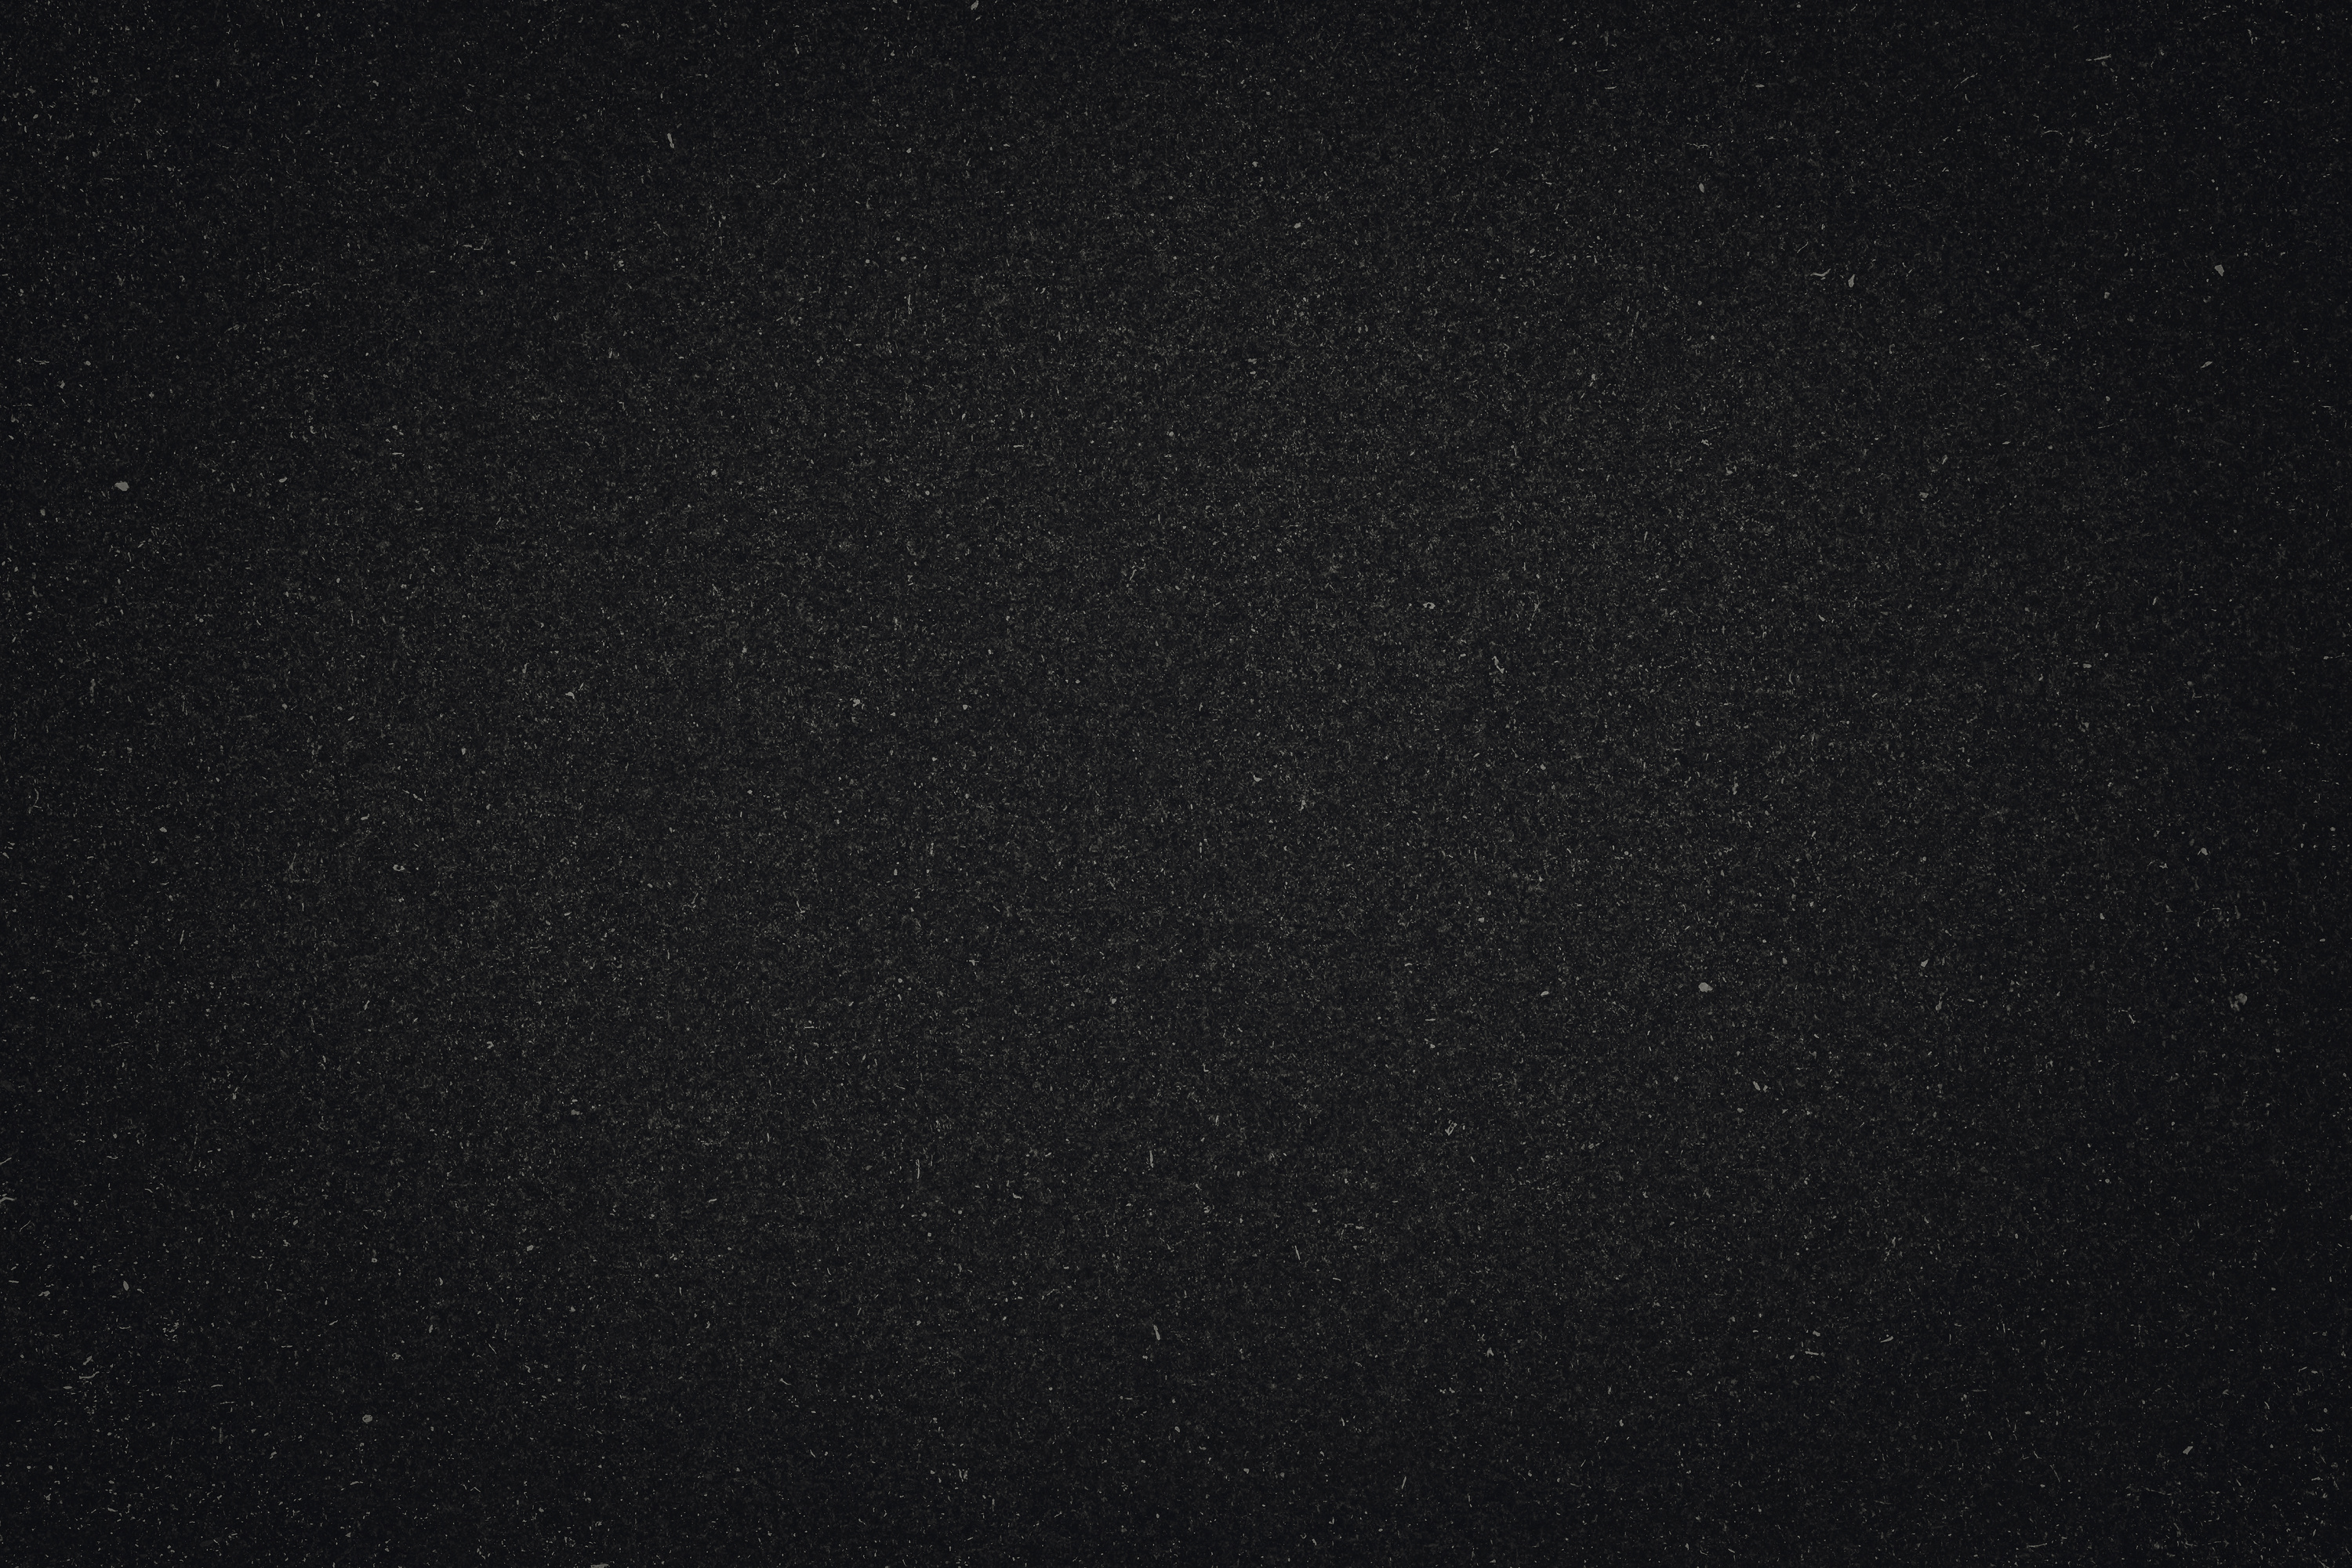 Black Paper Texture Cardboard Background, Grunge Old Recycled Pa